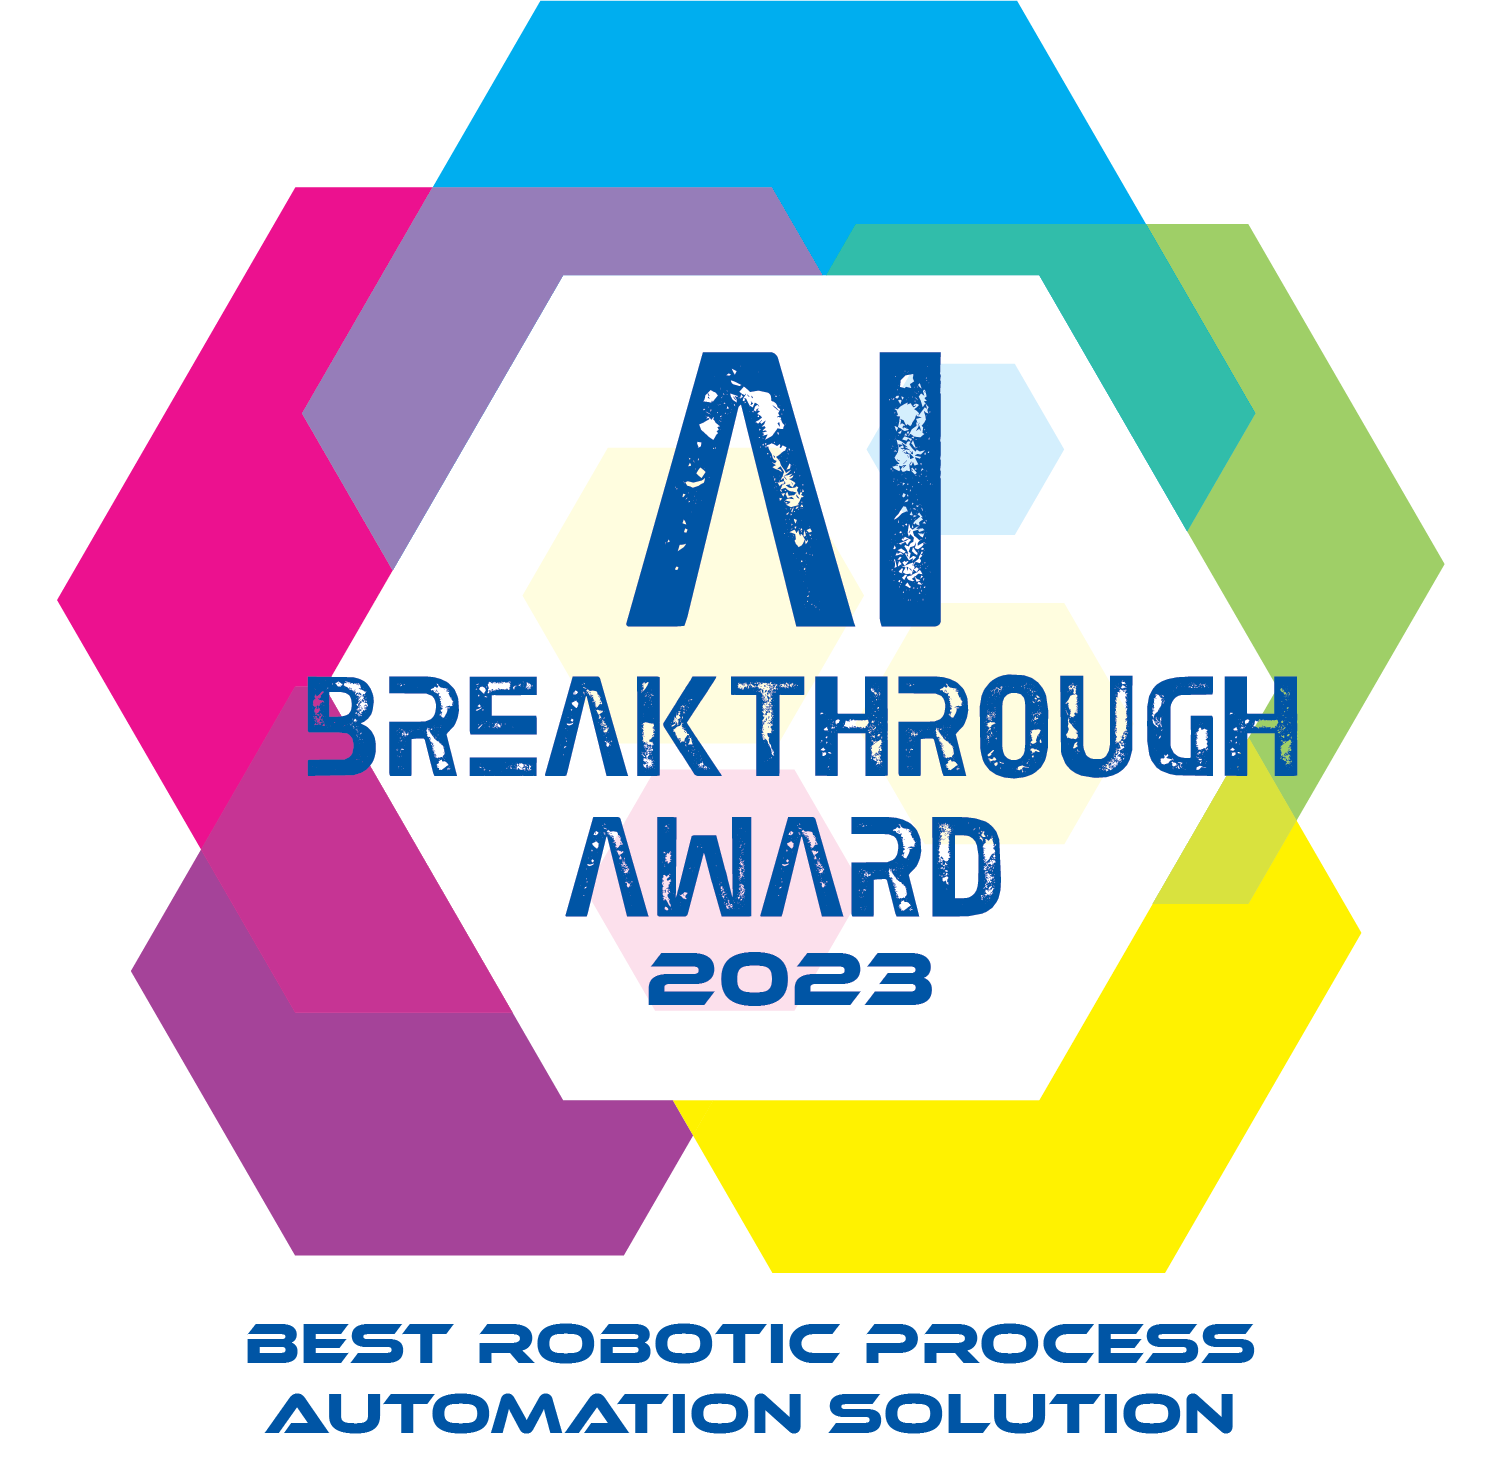 2023 AIBreakthrough Awards - Capgemini is the winner of the Best Robotic Process Automation Solution with Capgemini’s Automated Finance Code tool